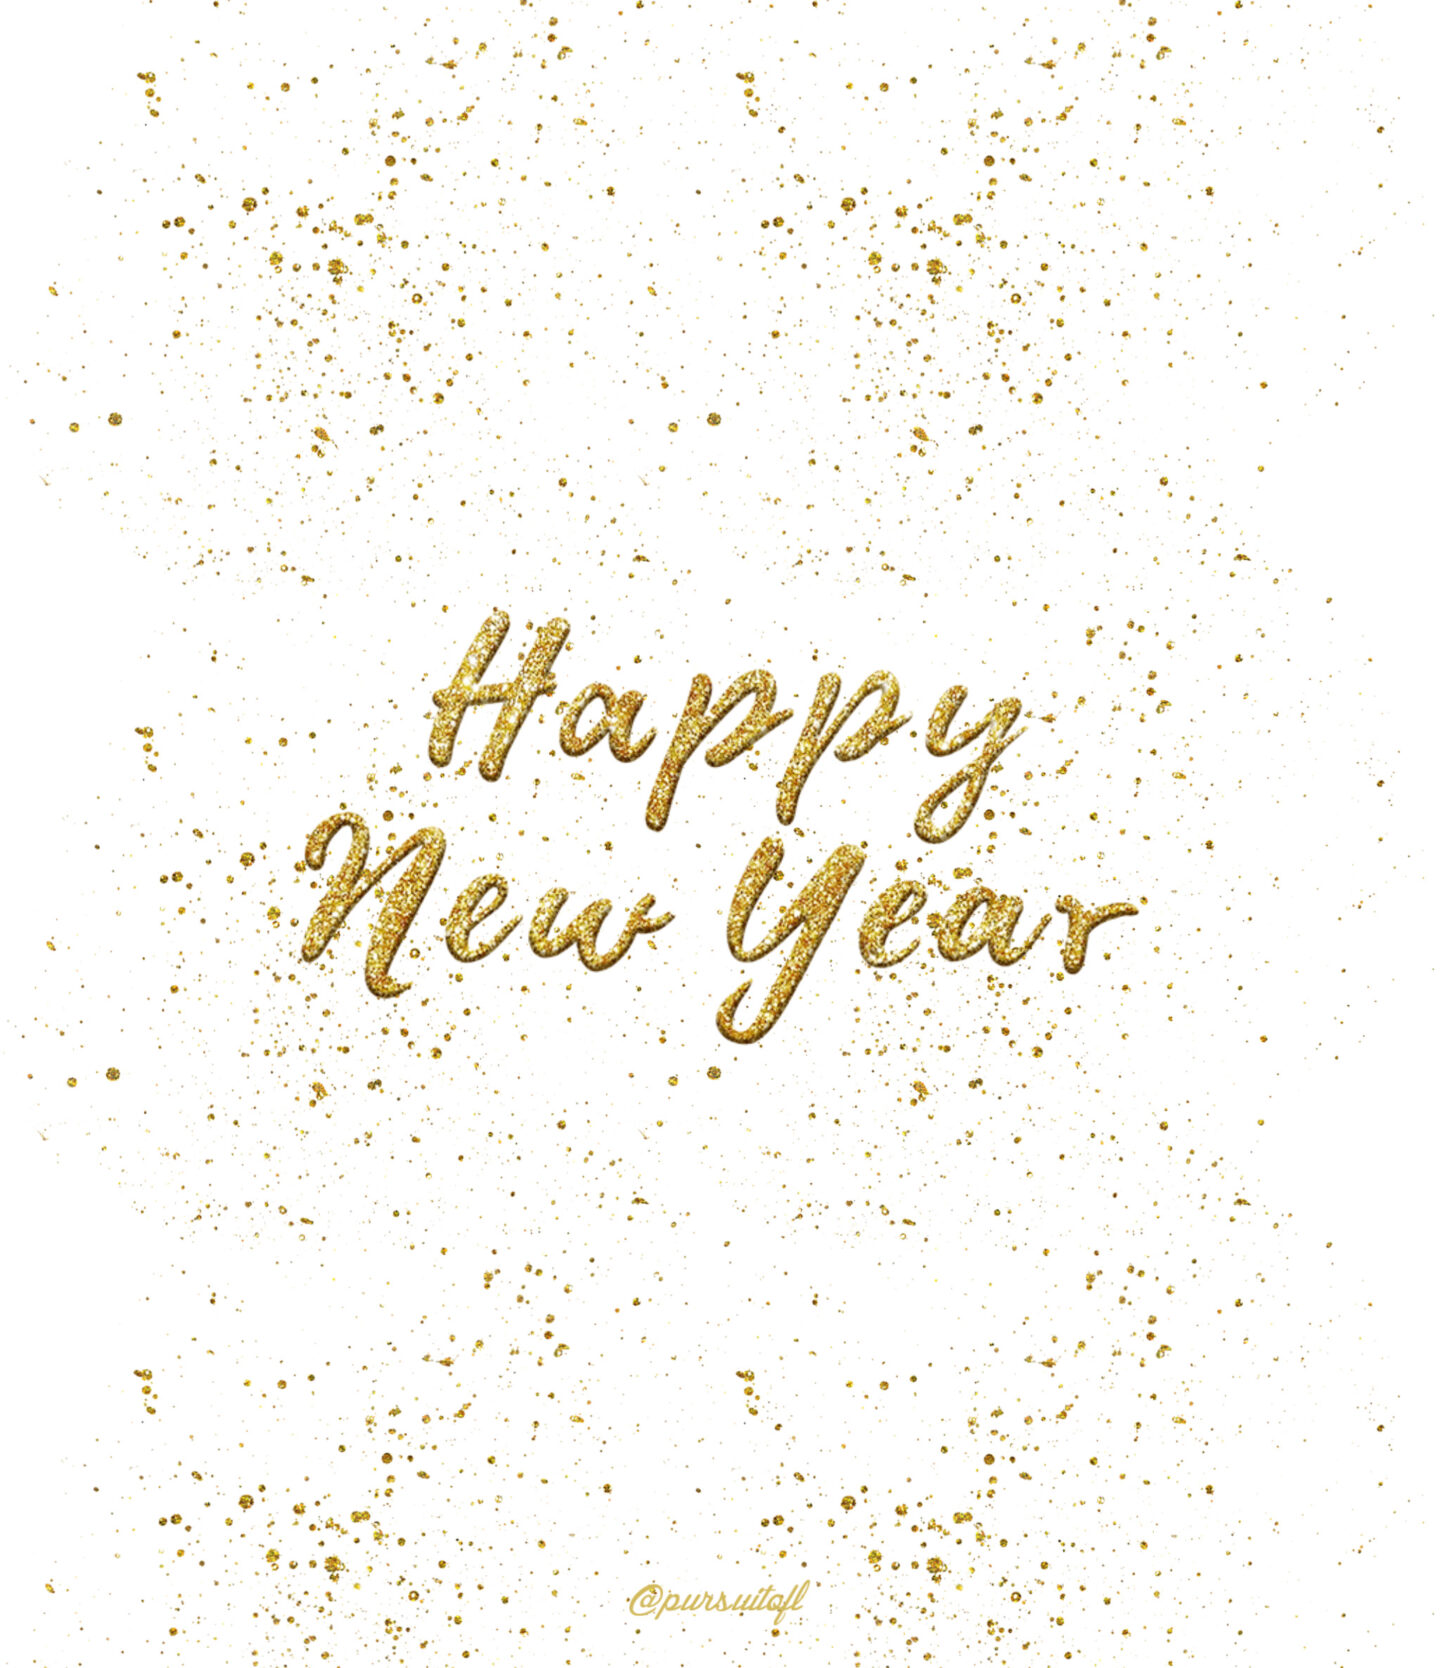 White Tablet Wallpaper with Gold Happy New Year Text and Gold Glitter